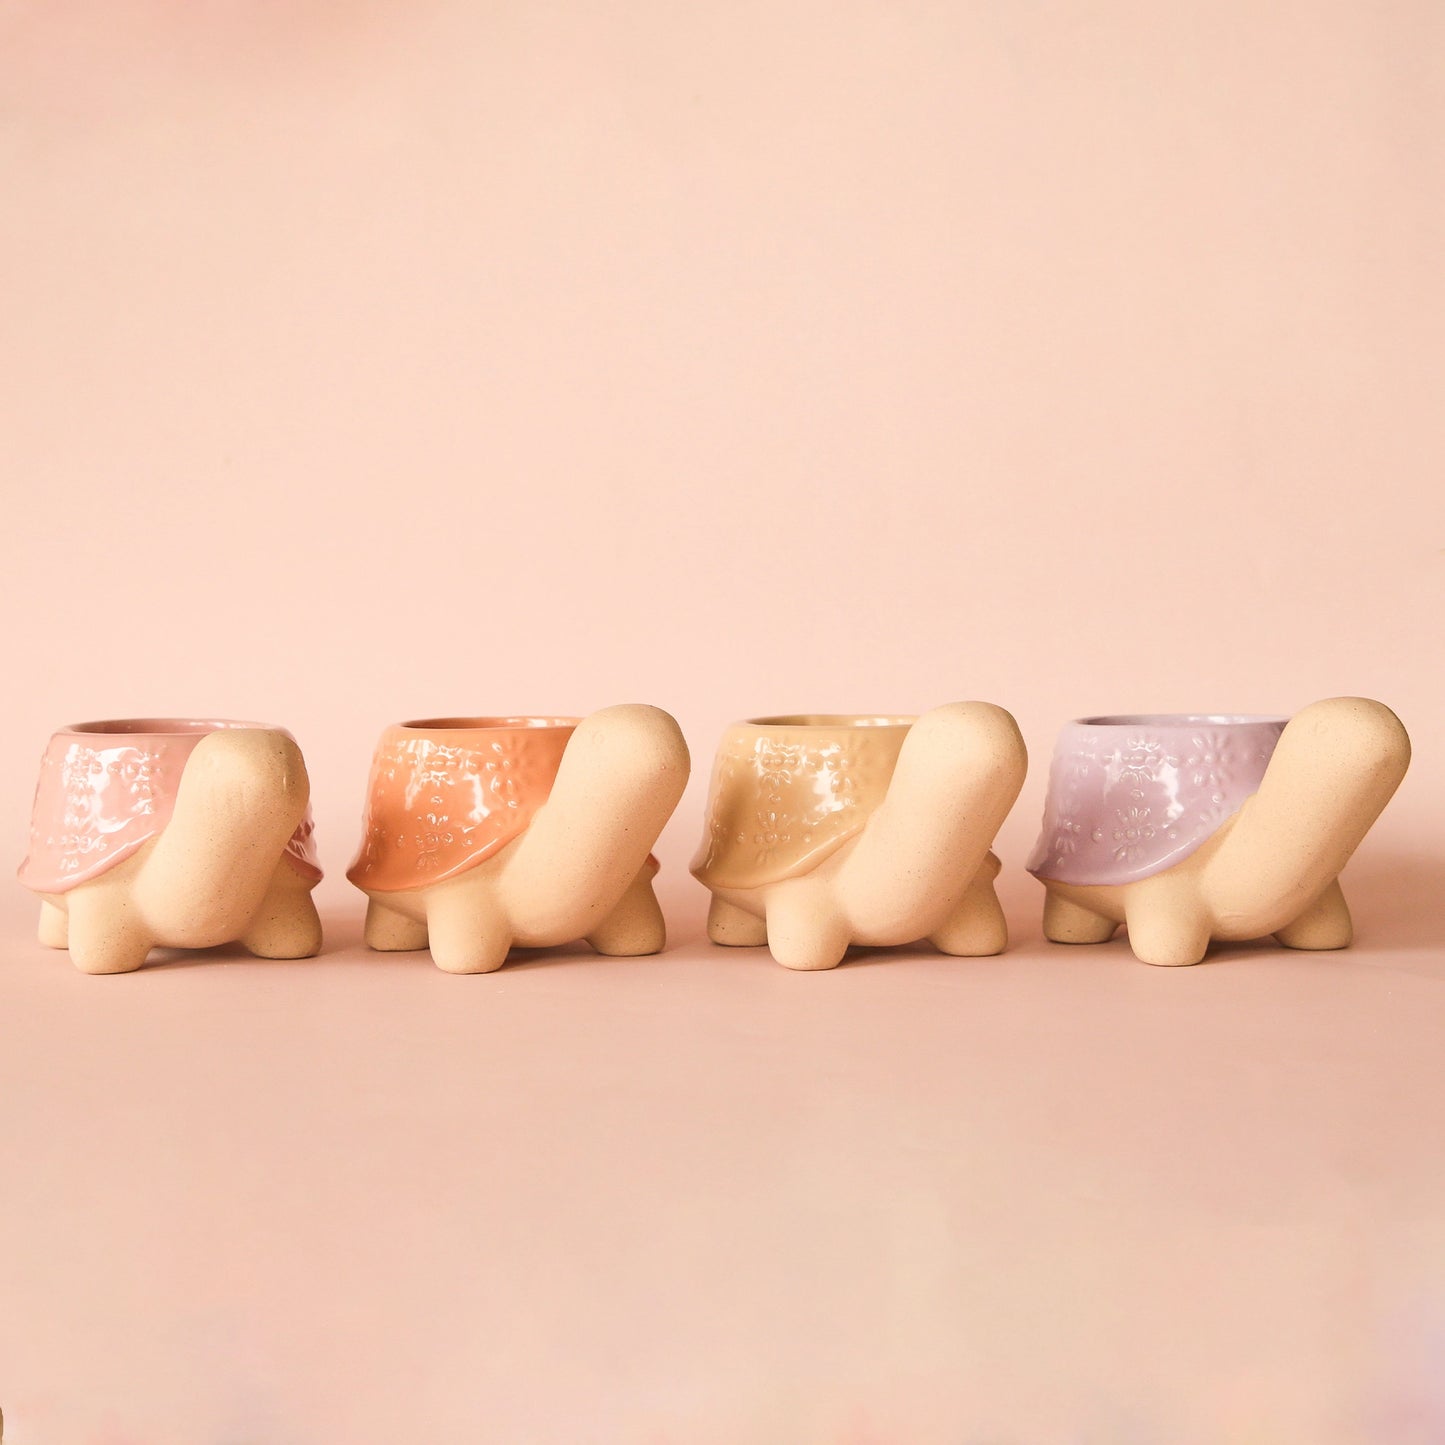 On a peachy background is four different colored turtle shaped ceramic planters. From left to right, the colors are pink, sunset, sand and lilac.